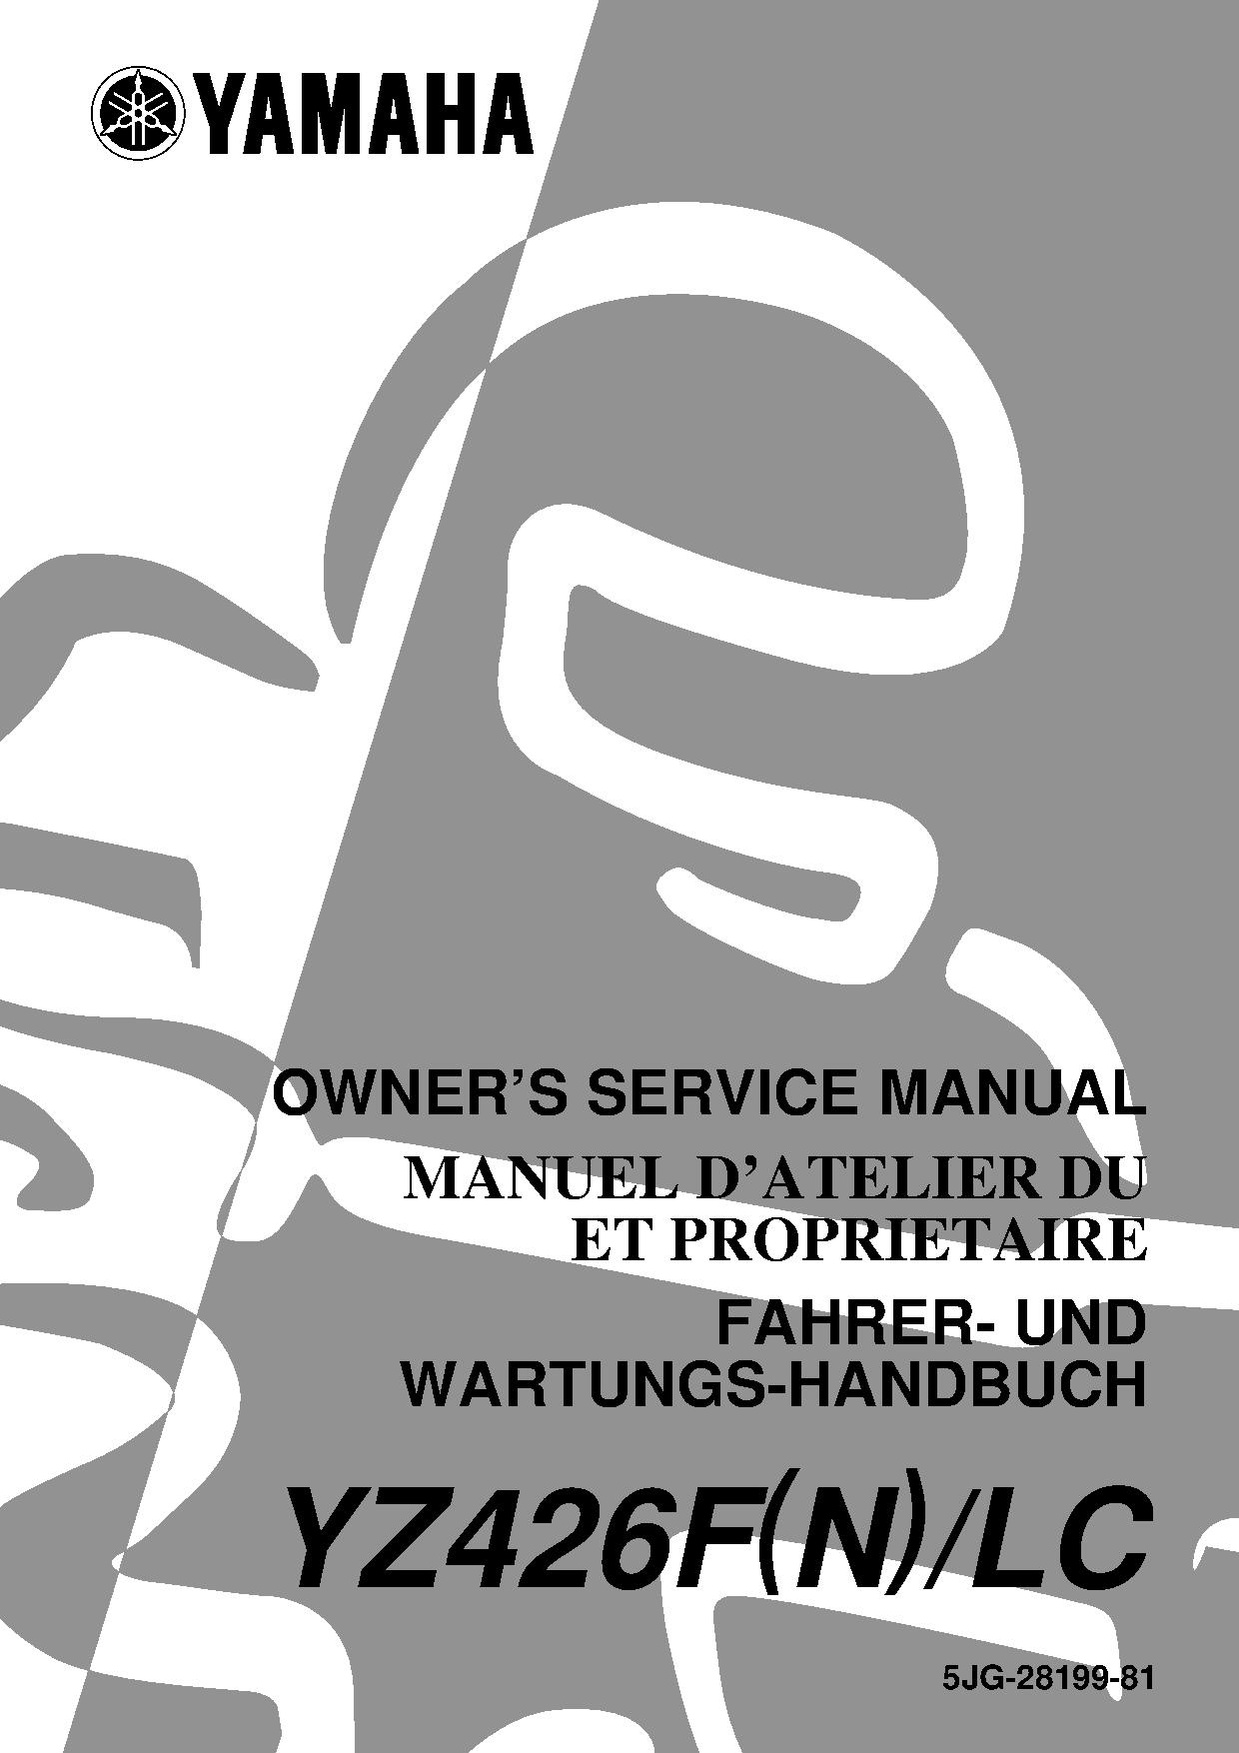 File:2001 Yamaha YZ426F (N) LC Owners Service Manual.pdf - CycleChaos